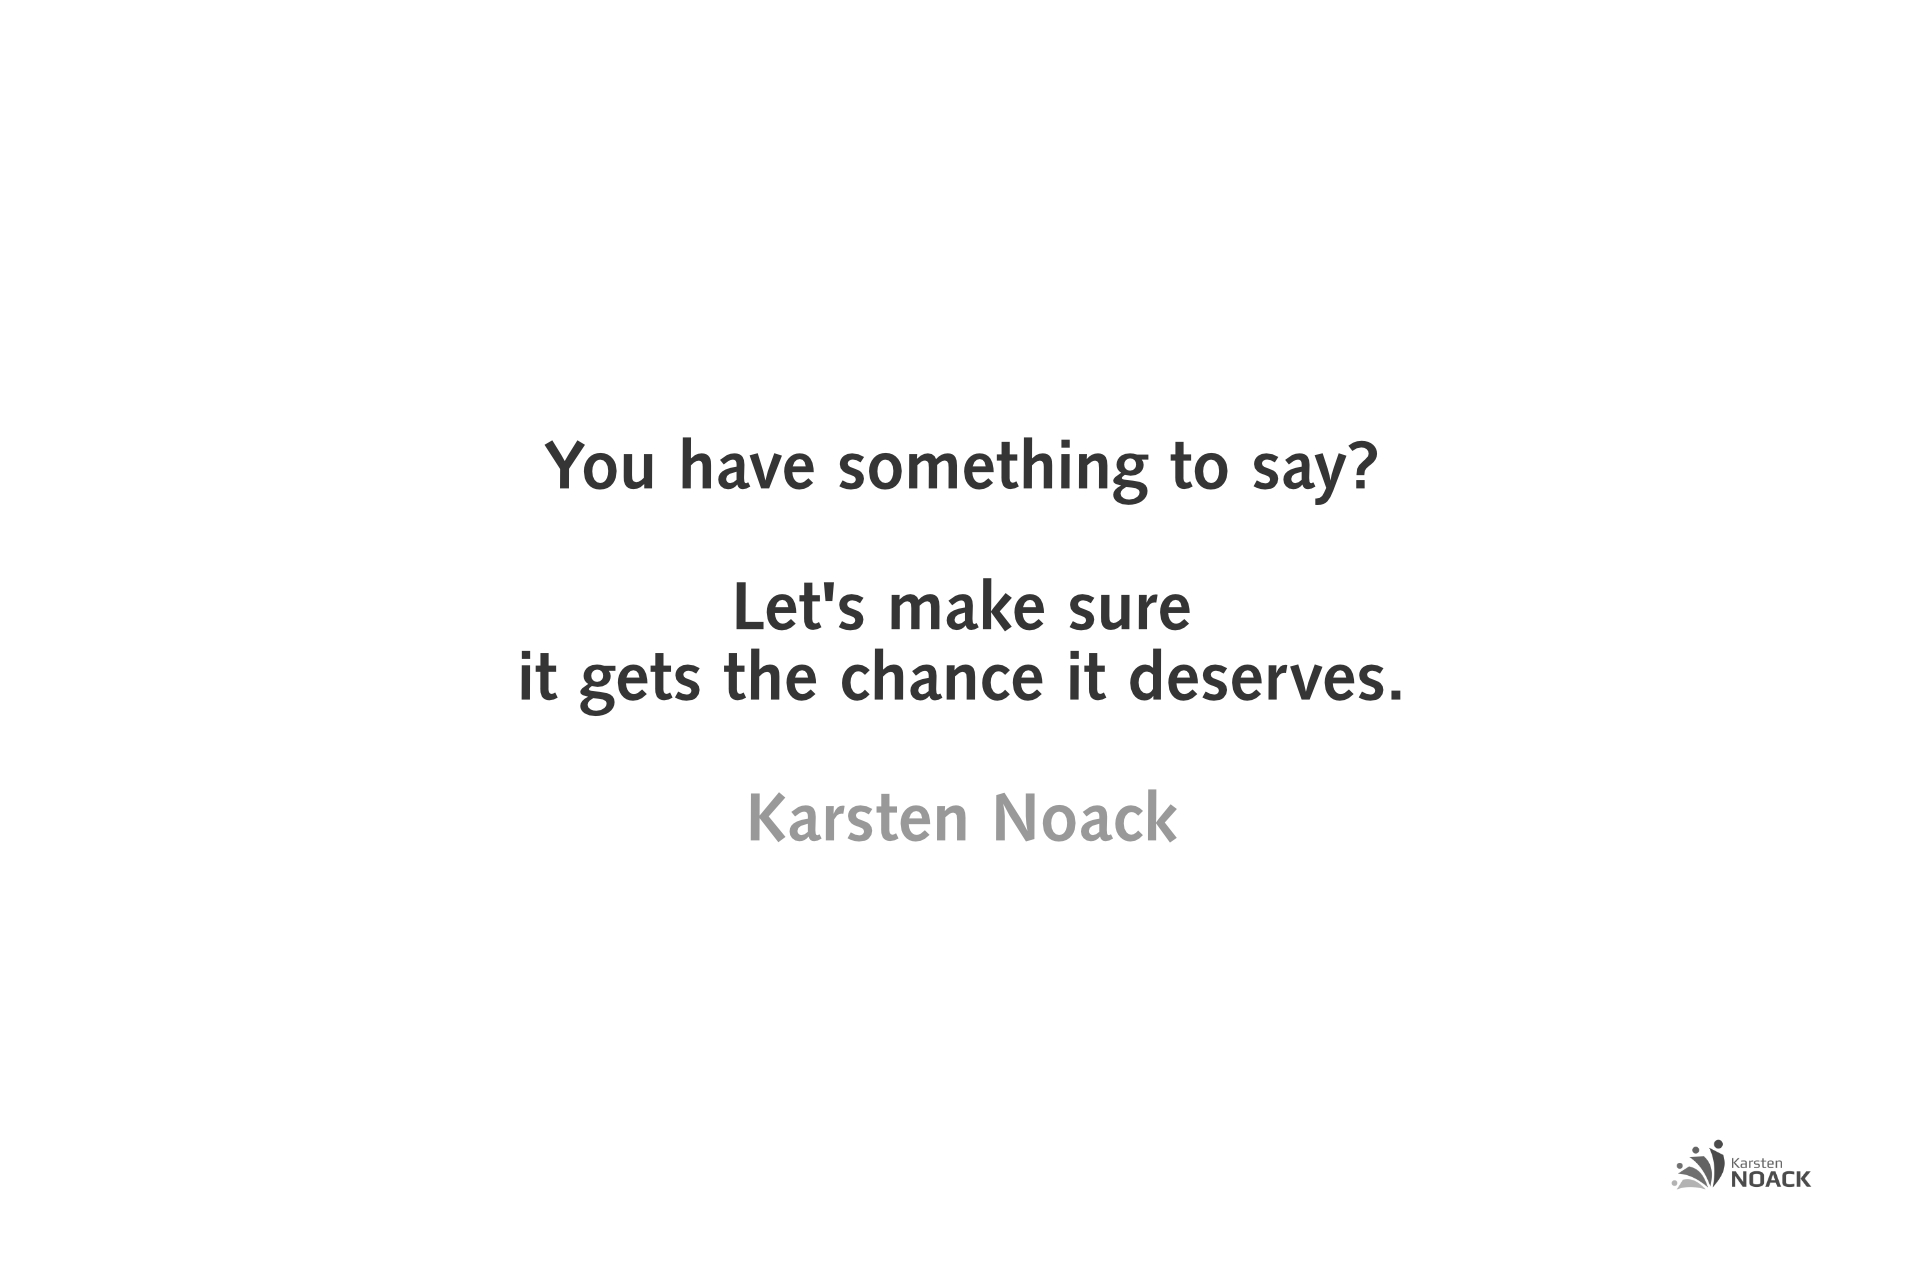 You have something to say? Let's make sure it gets the chance it deserves.